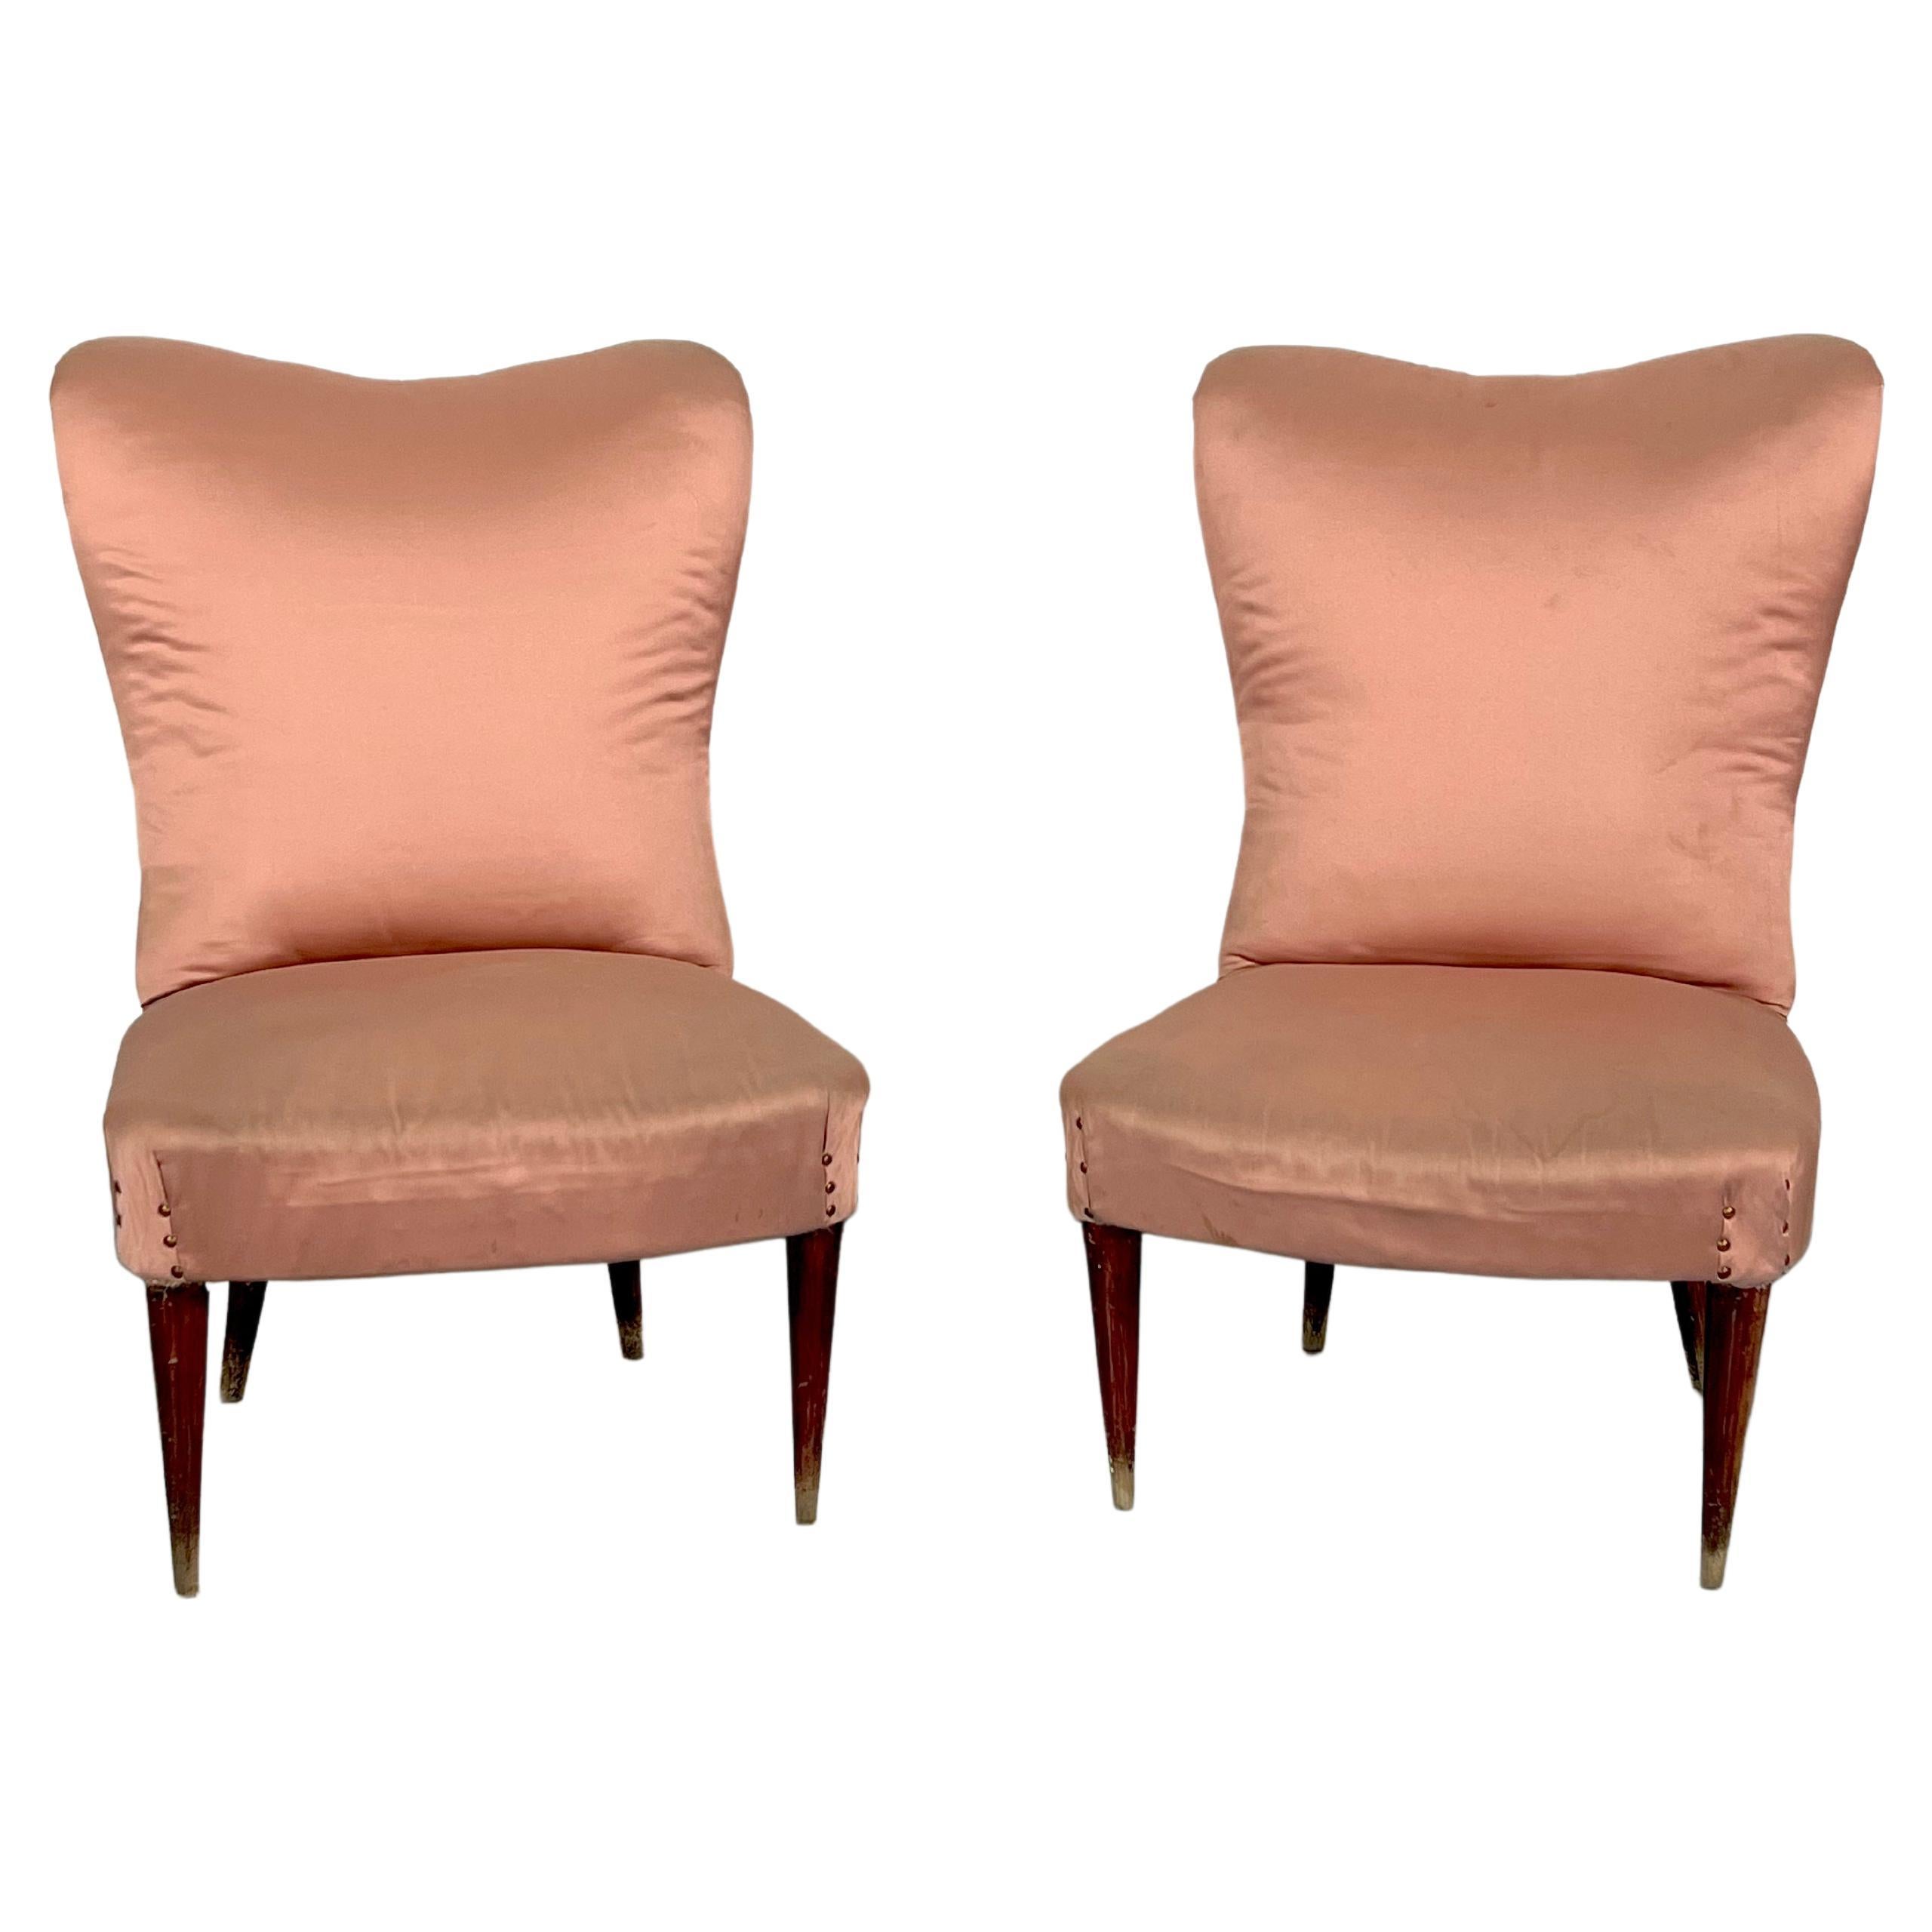 Italian Vintage Pair of Club Armchairs in the Manner of Gio Ponti, 1950s For Sale